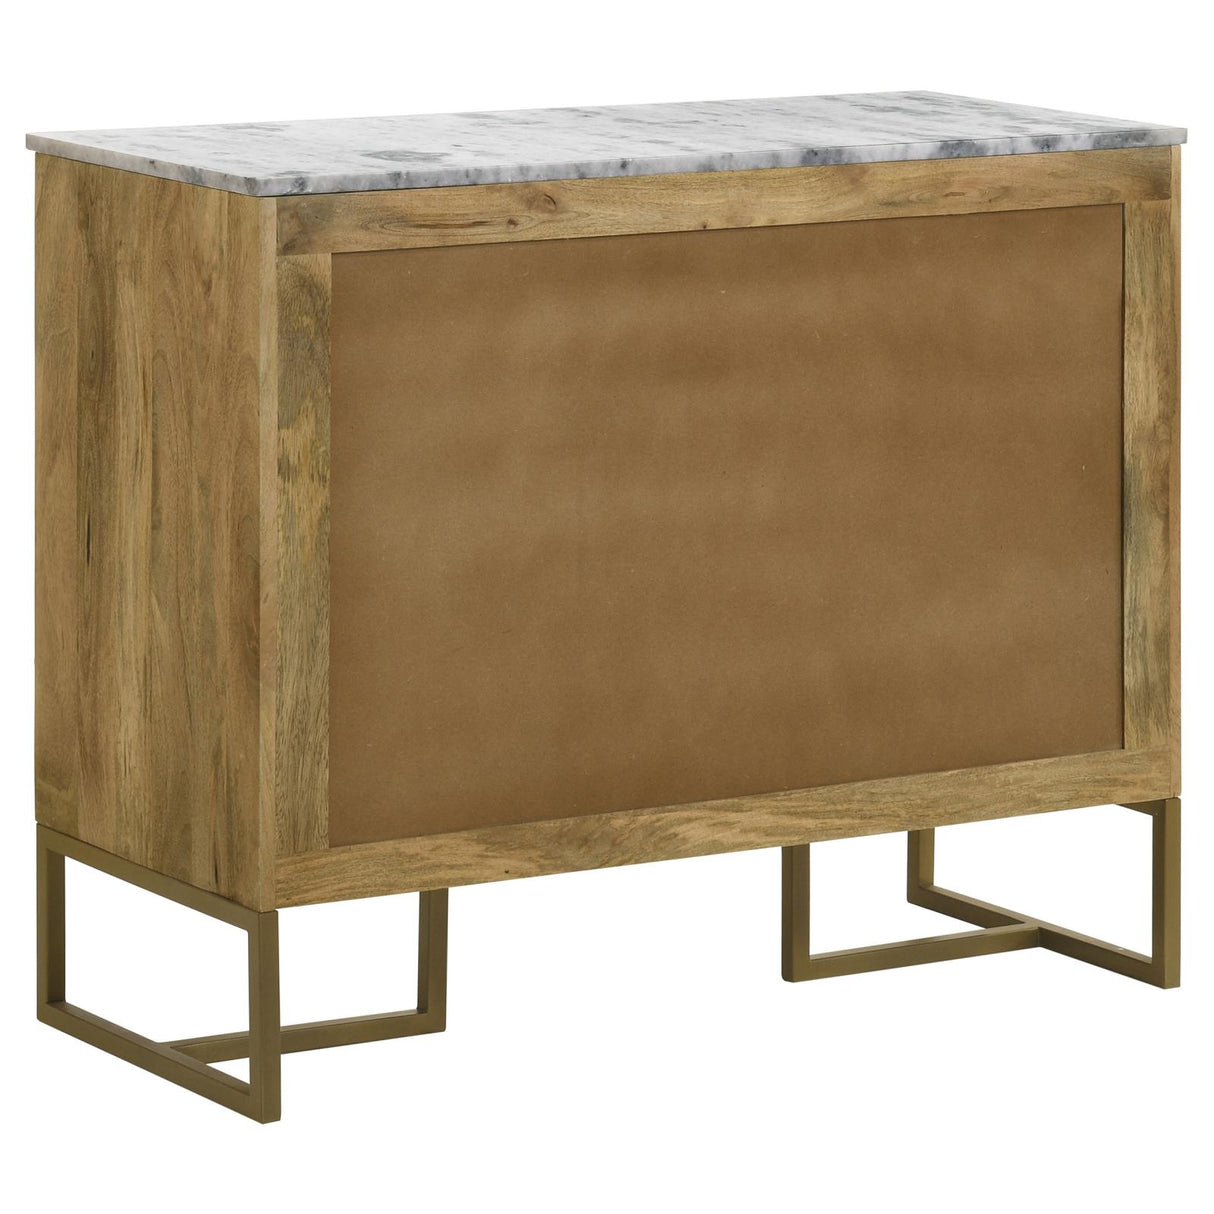 Keaton 2-door Accent Cabinet with Marble Top Natural and Antique Gold - 951139 - Luna Furniture